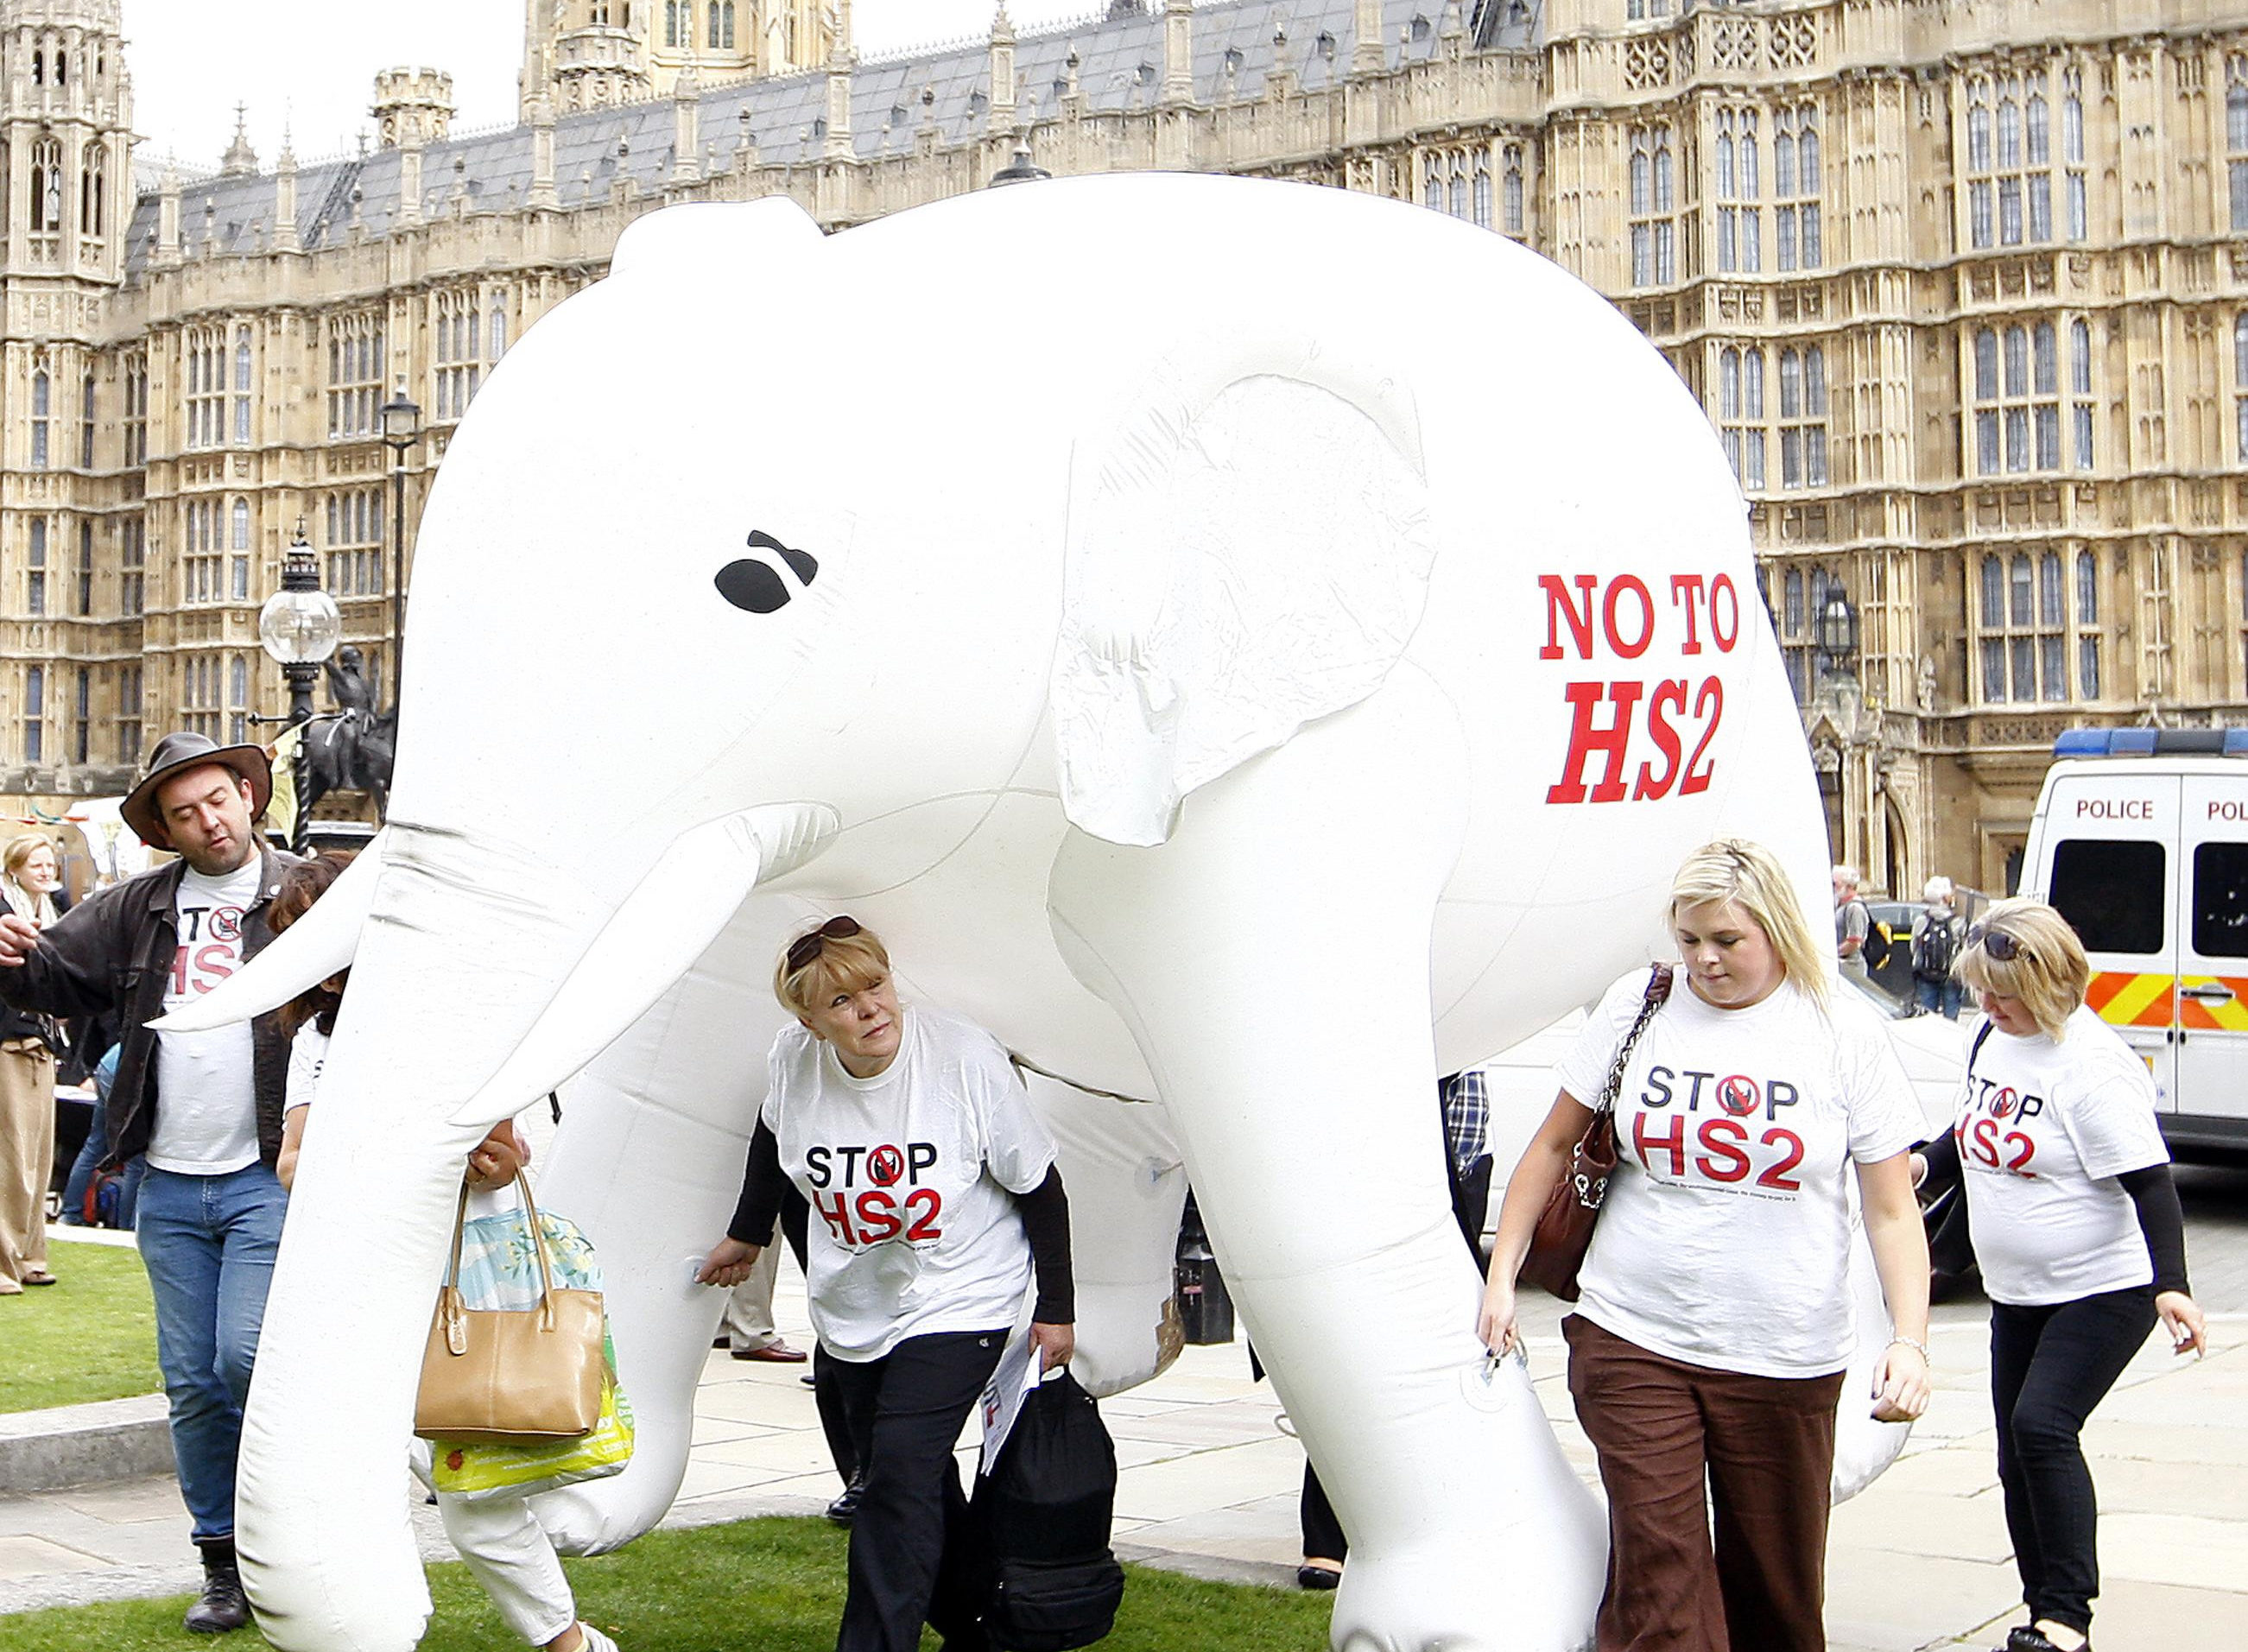 Members of STOP HS2 with their 10 foot high inflatable white elephant outside parliament, London, as both the Secretary of State for Transport Philip Hammond and the staff of HS2 Ltd give evidence to the Transport Select Committee inquiry of HS2, the proposed new high speed rail link.